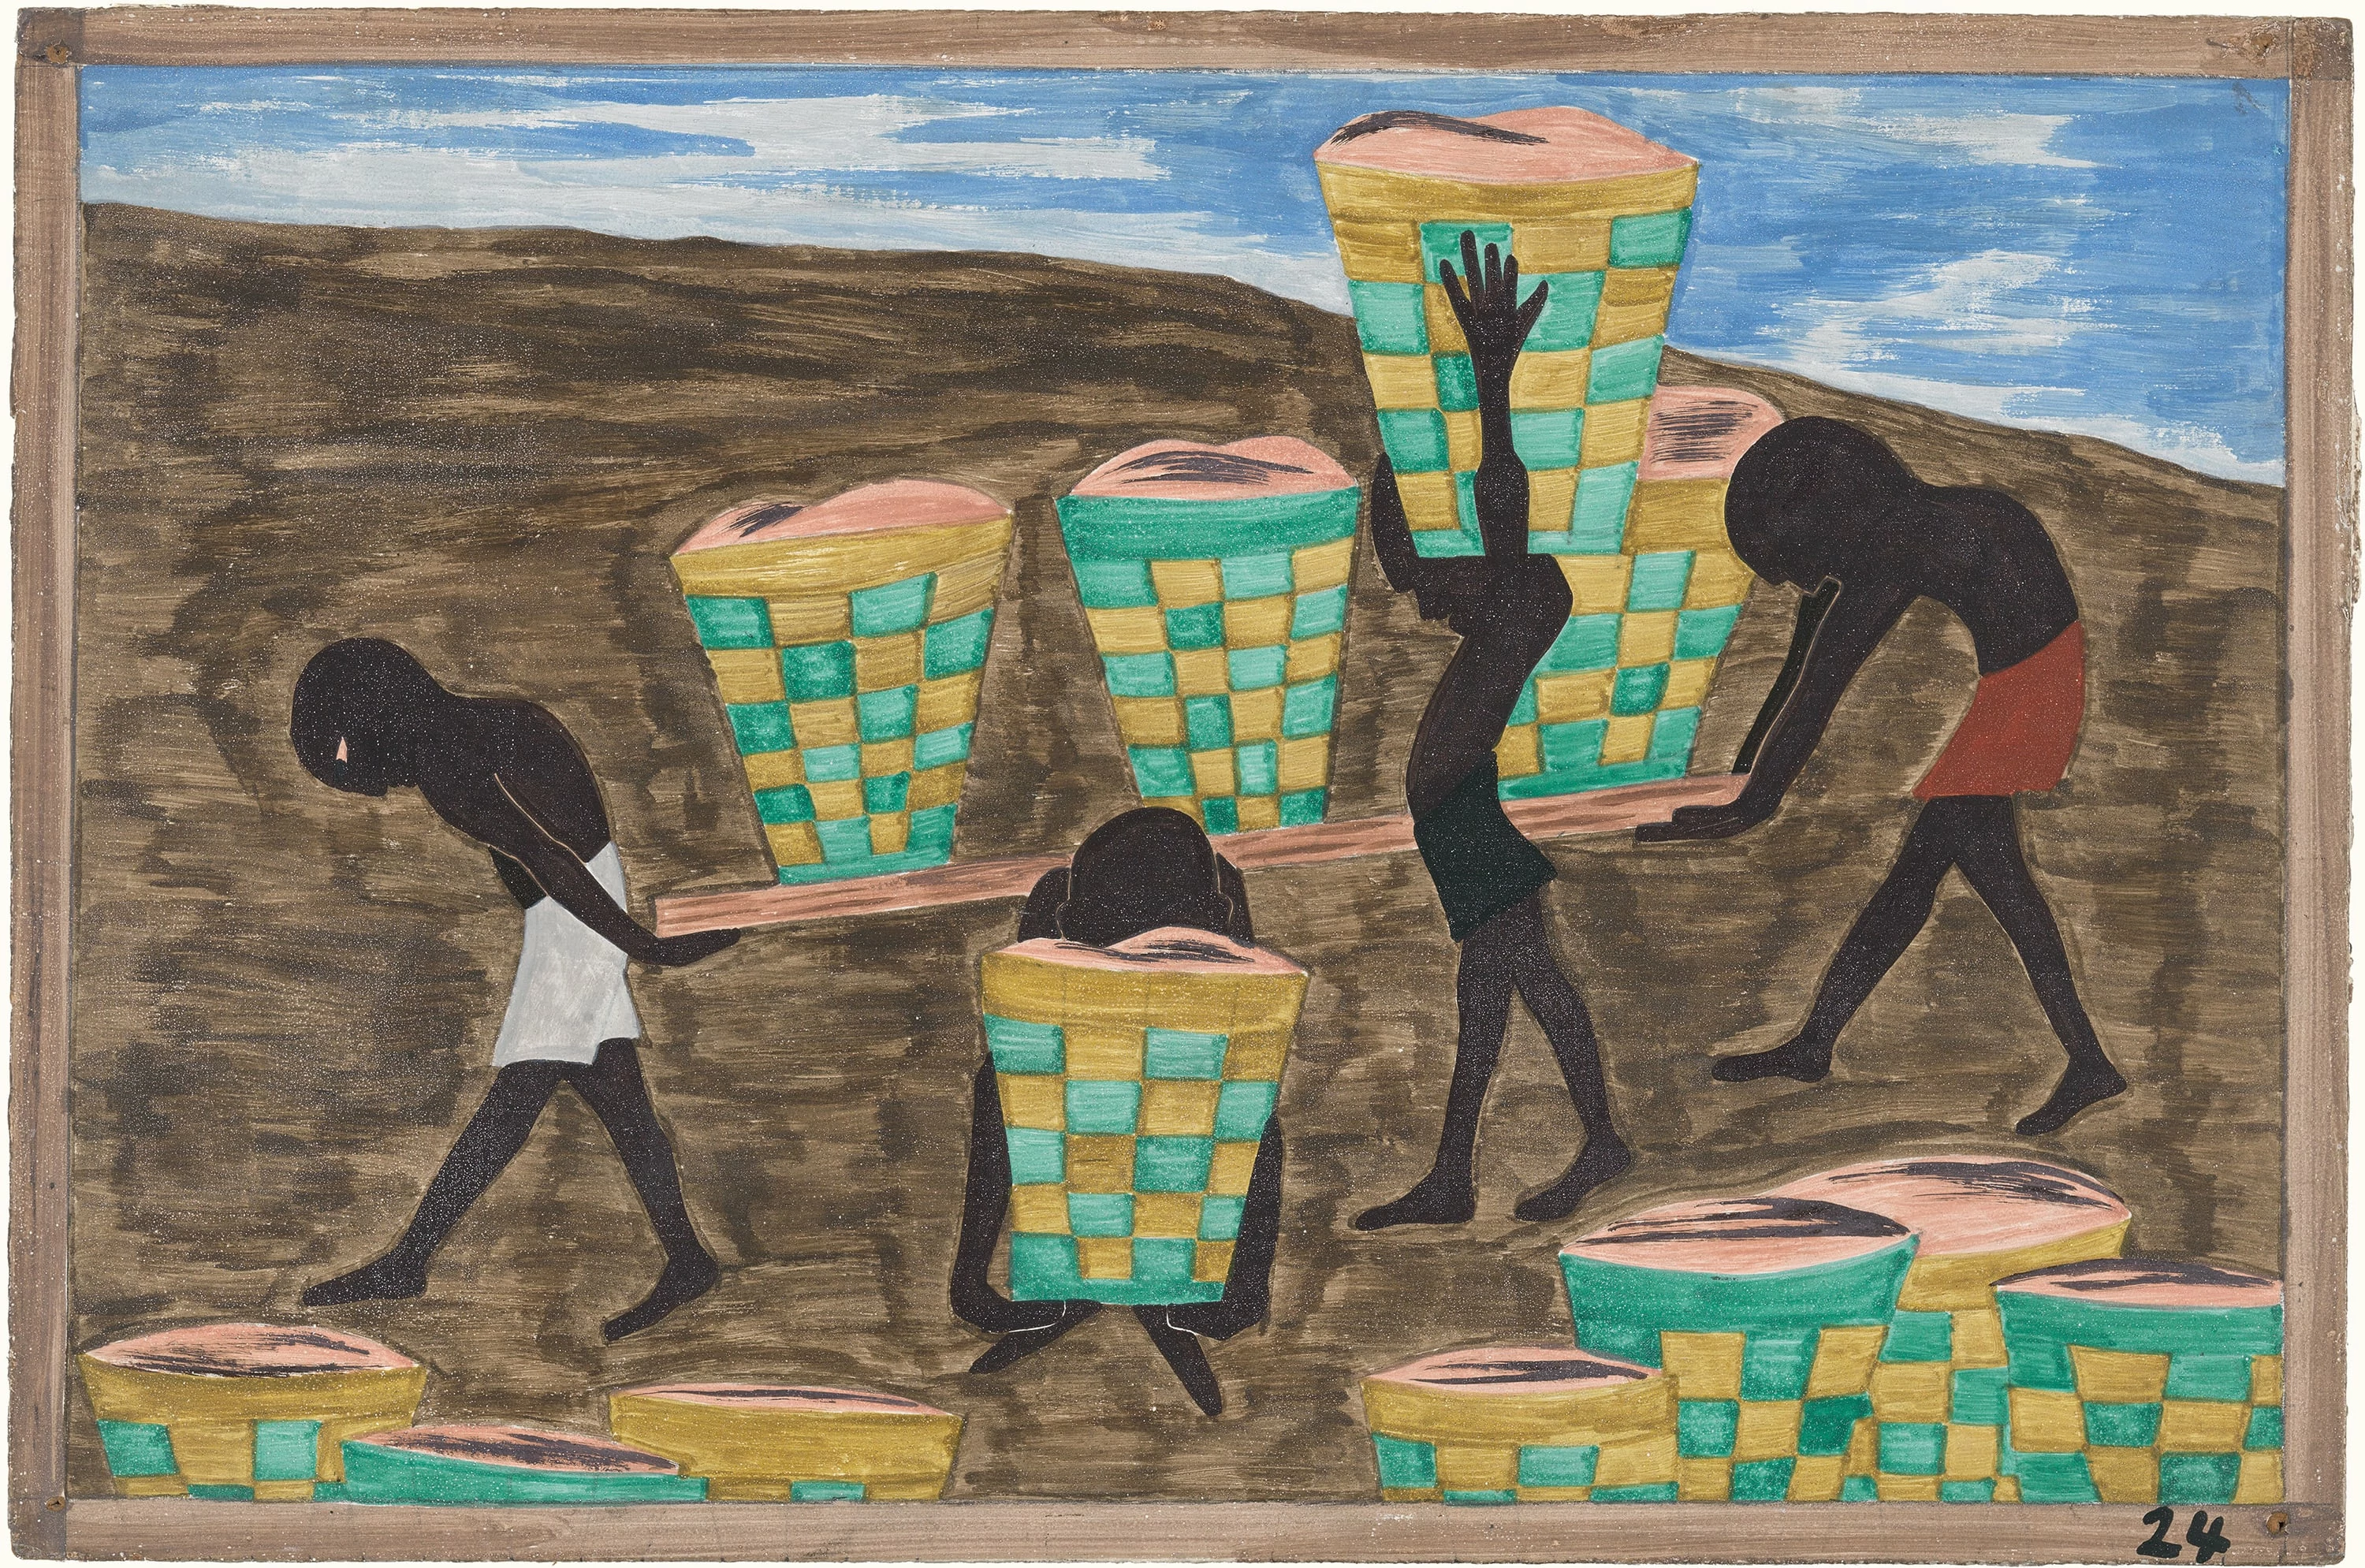 Migration Series No.24: Their children were forced to work in the fields. They could not go to school, Jacob Lawrence